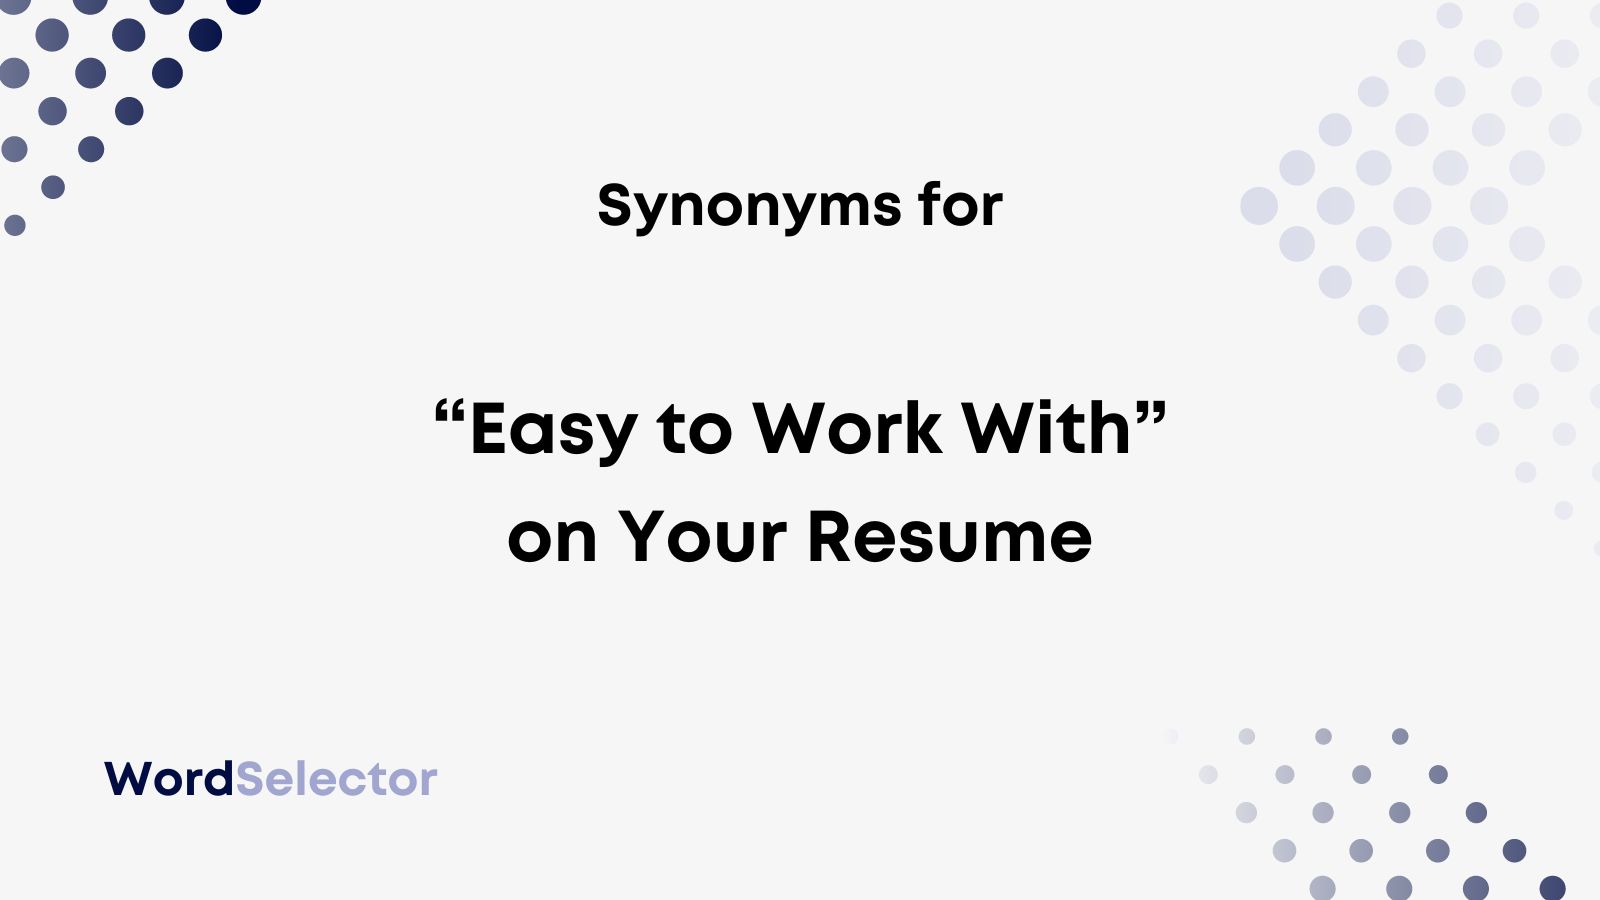 12 Synonyms to Work With” on Your Resume WordSelector